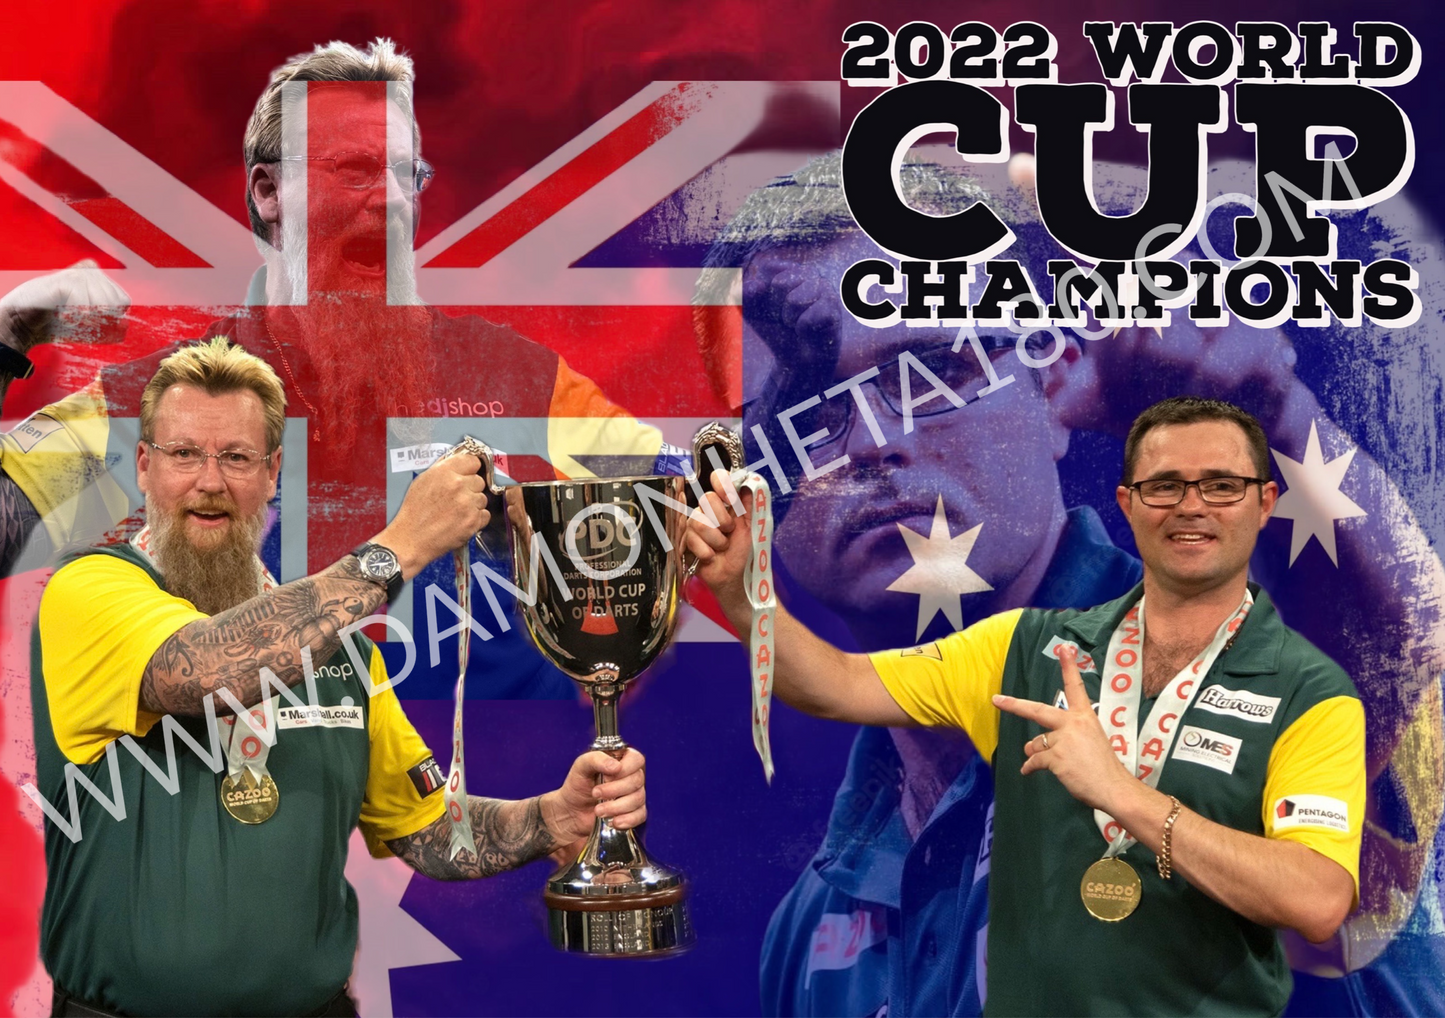 Australia World Cup Champions Print Red & Blue - Signed by Damon & Simon